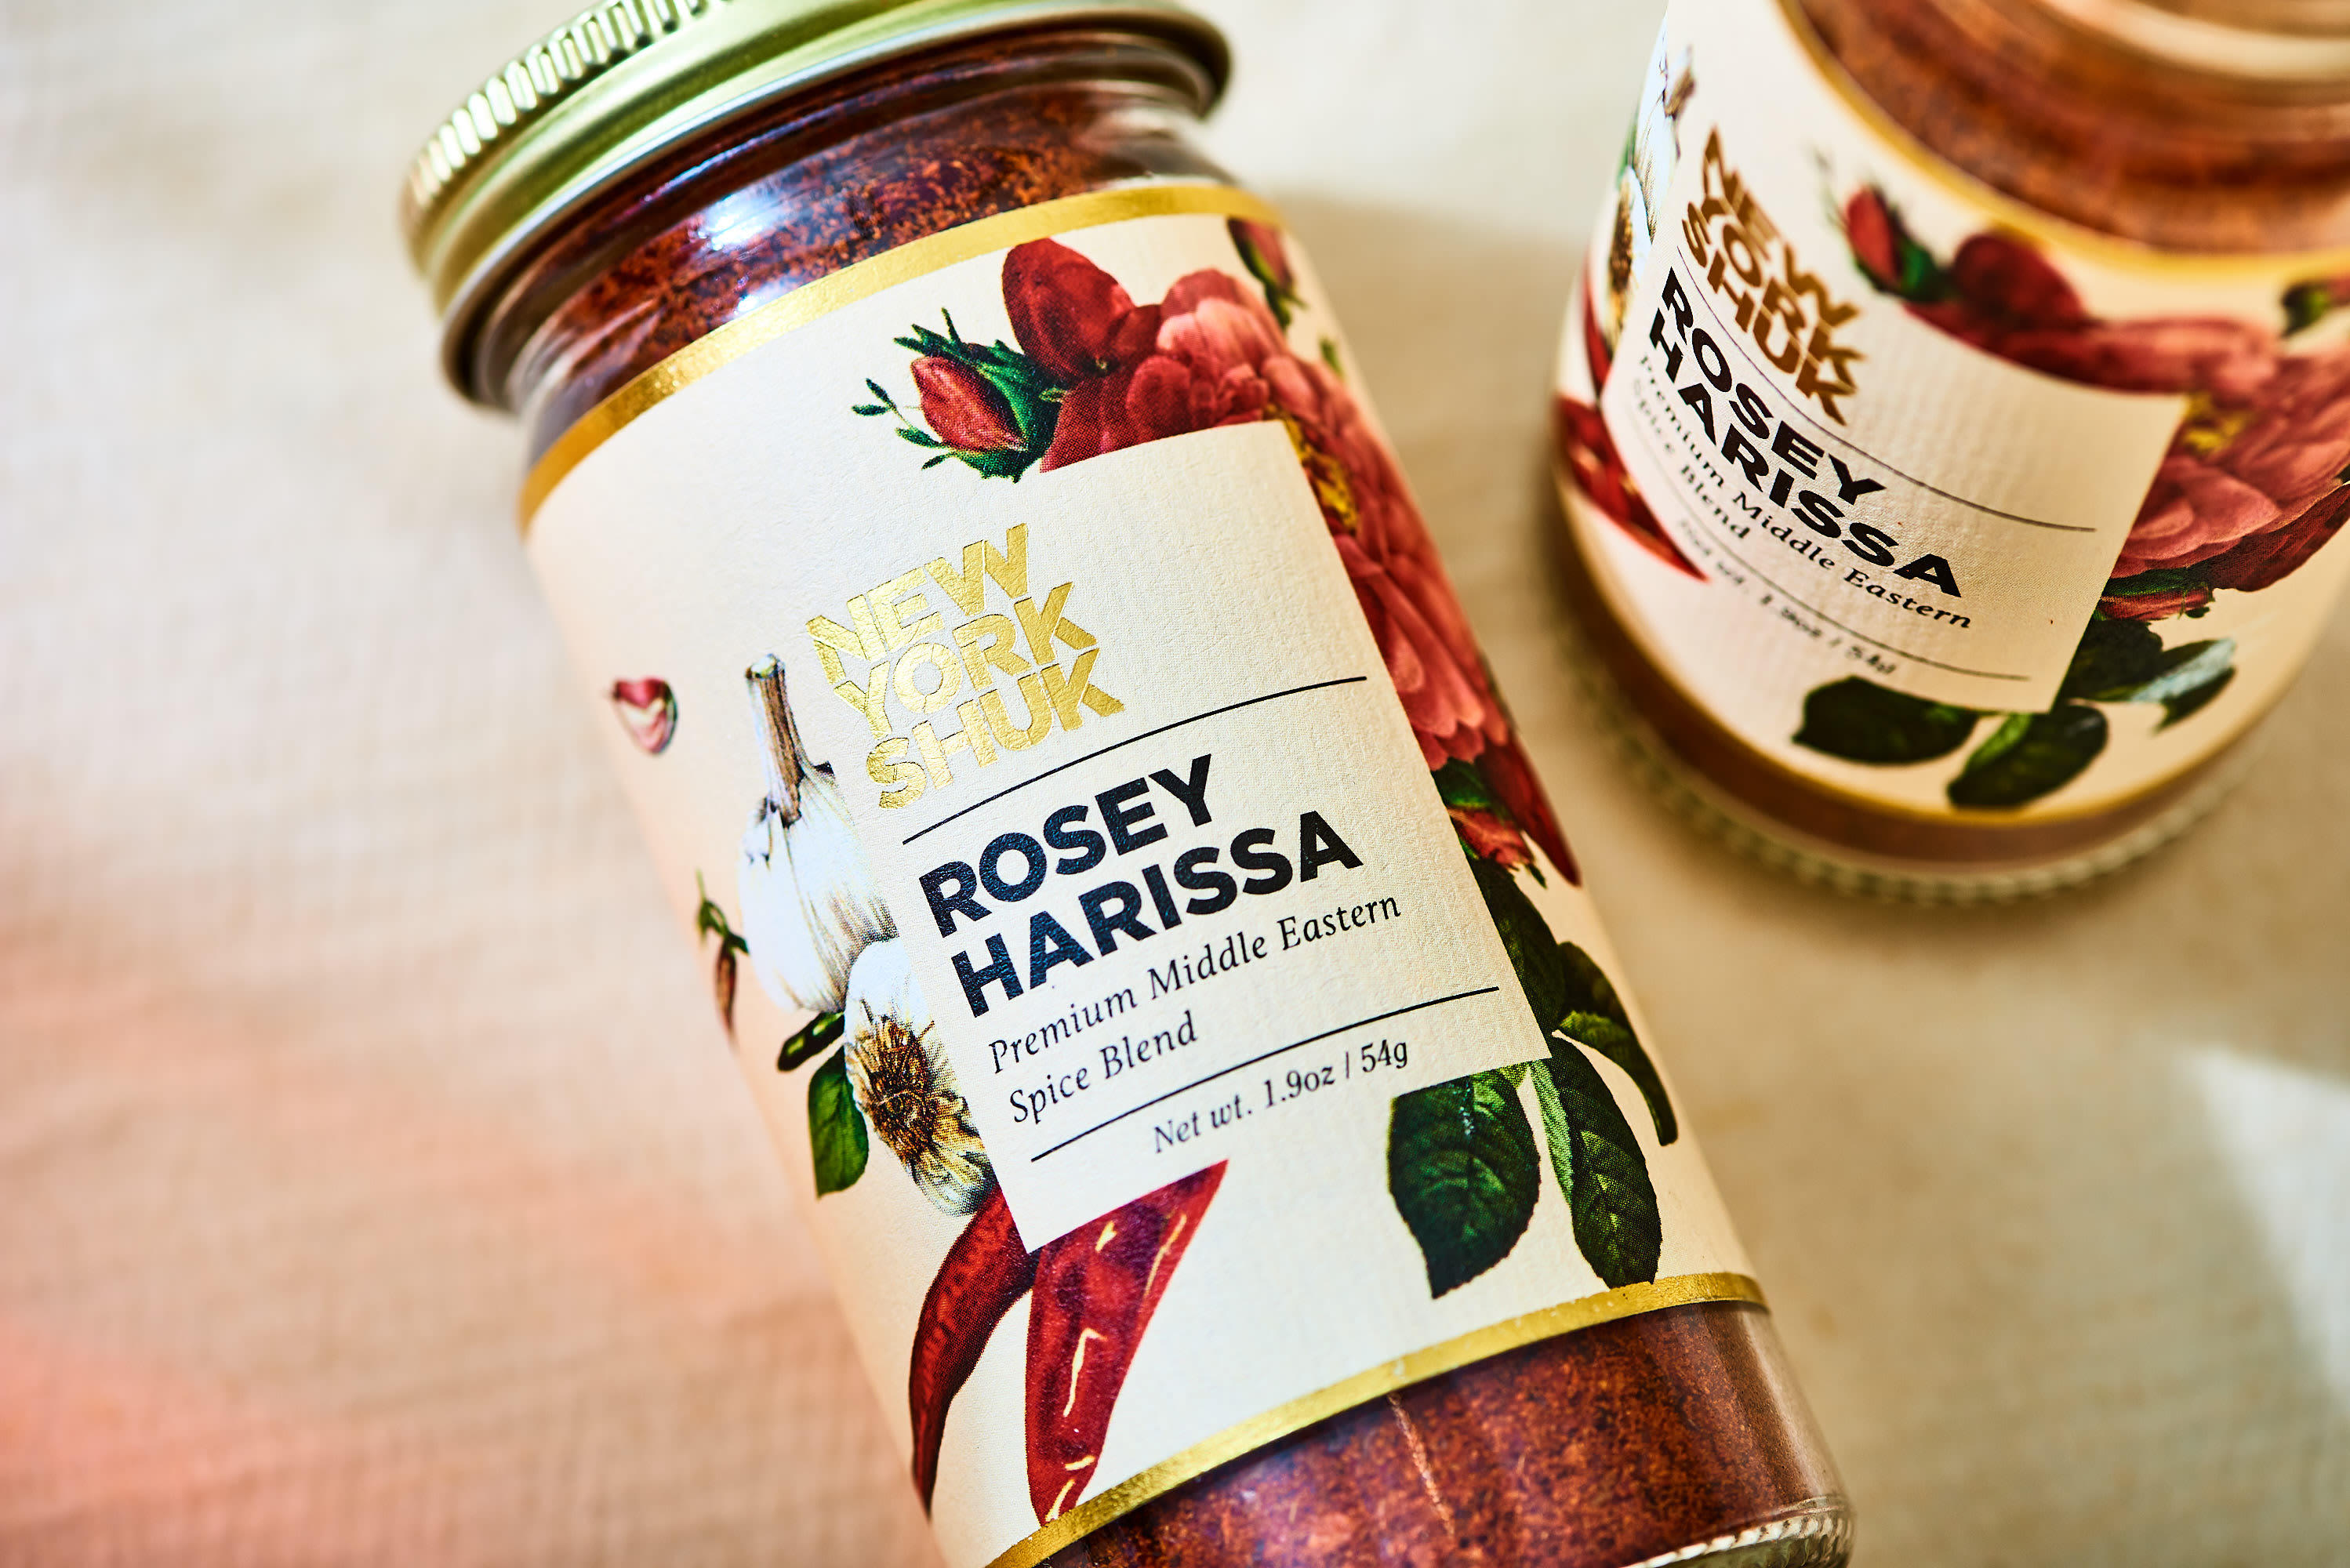 ROSEY HARISSA SPICE — Middle Eastern Pantry & Recipes | New York Shuk